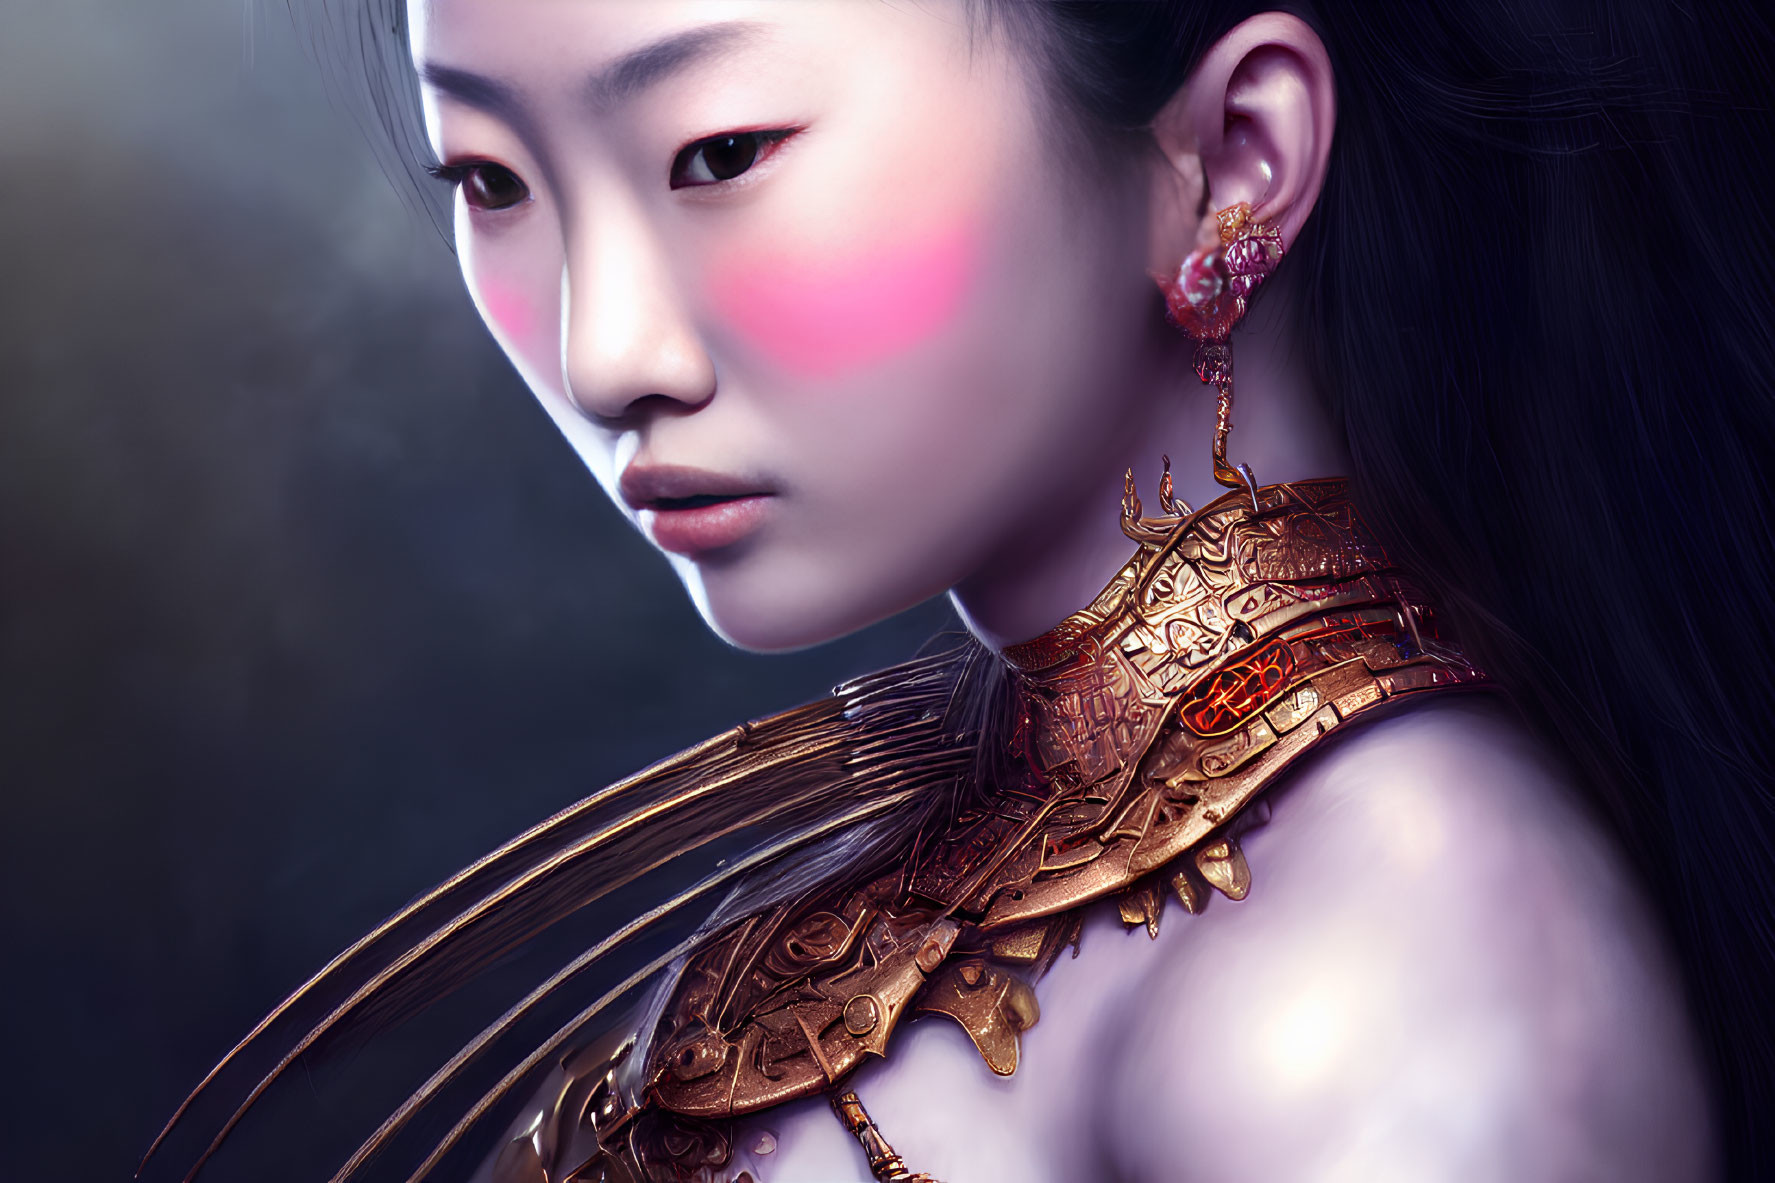 Detailed digital artwork of woman in ornate armor with red cheek makeup and intricate earring against dark background